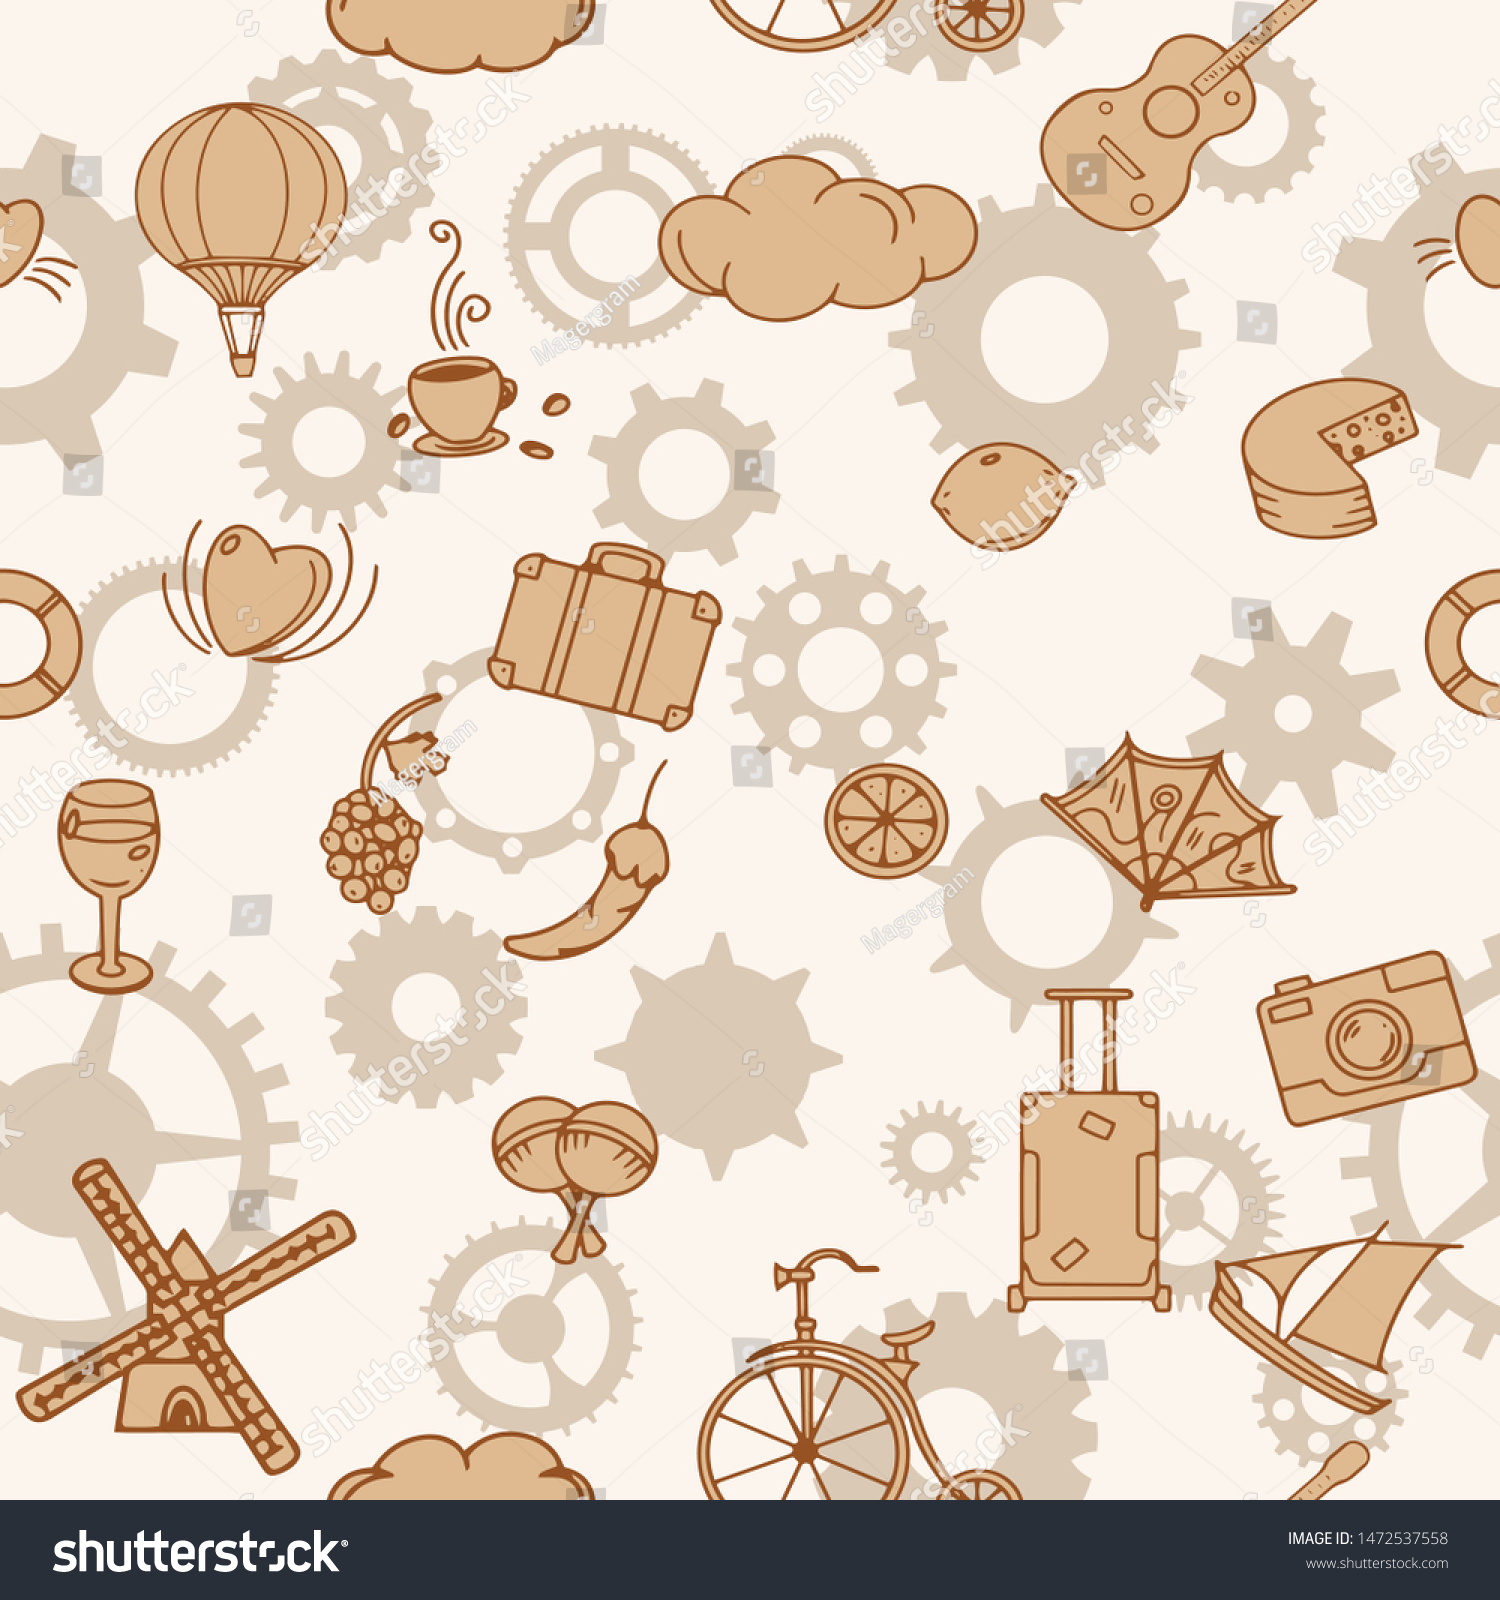 Cute vintage wallpaper steampunk seamless background stock vector royalty free